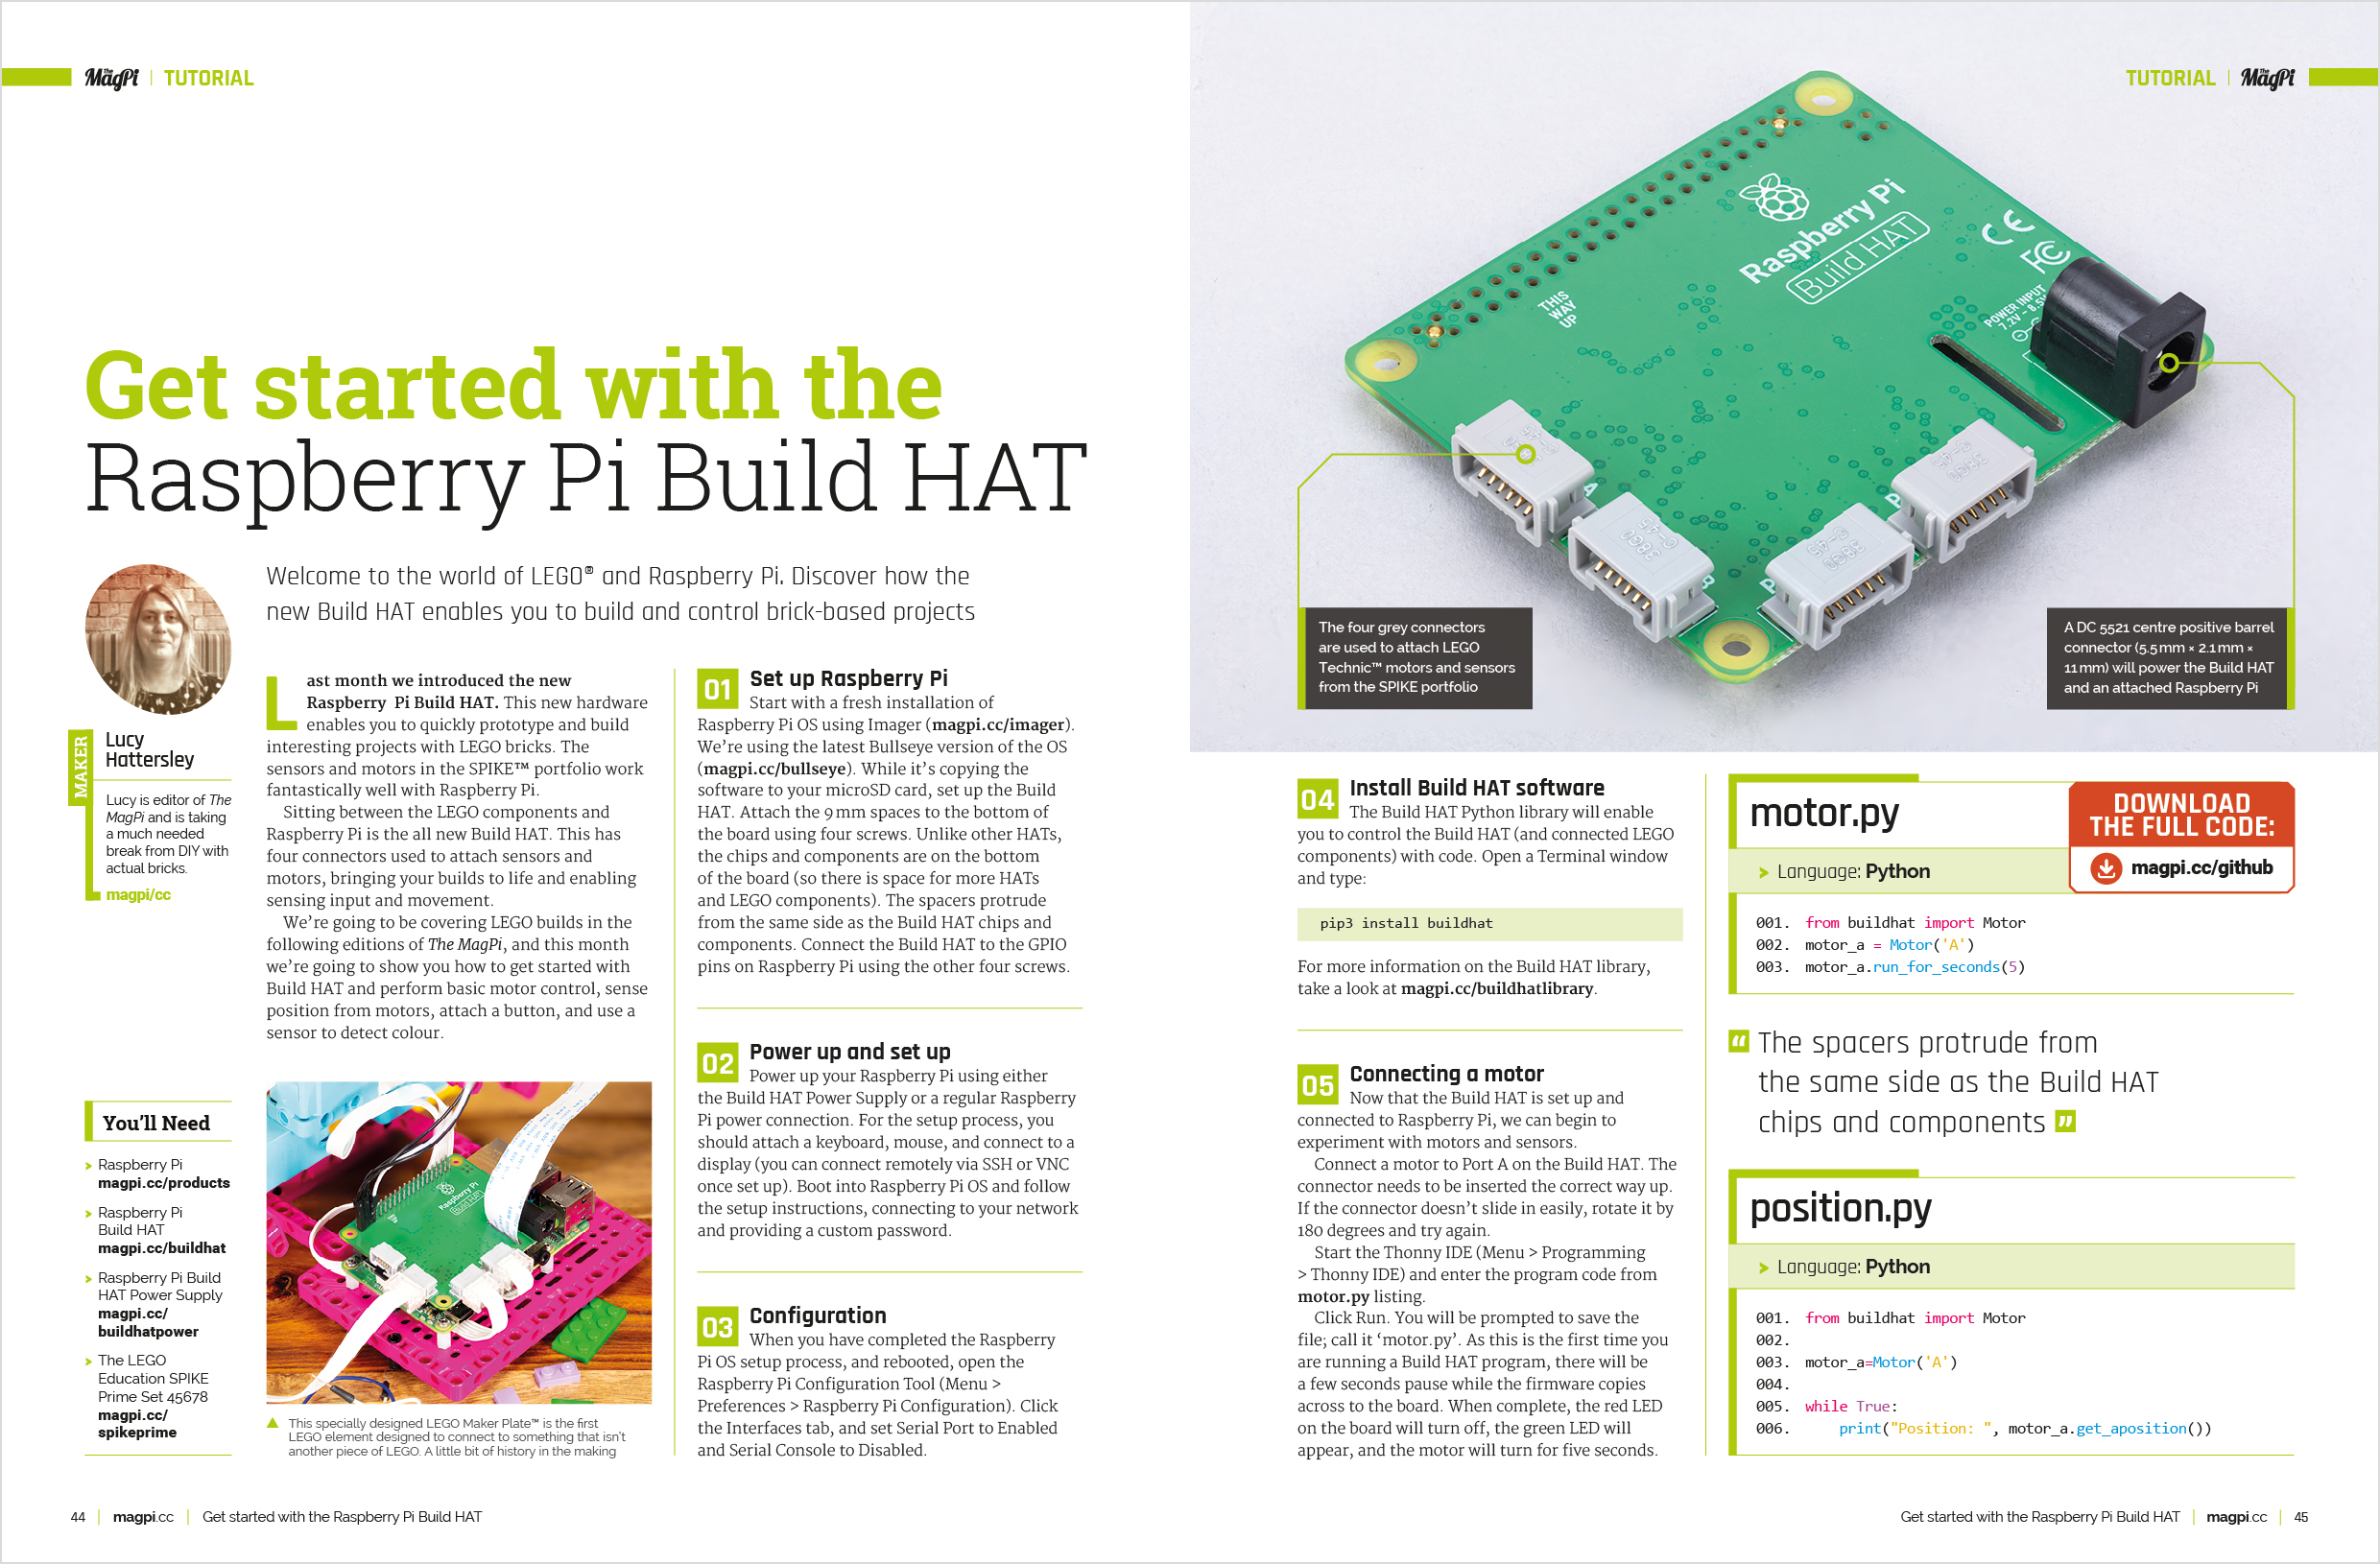 Get started with the Raspberry Pi Build HAT